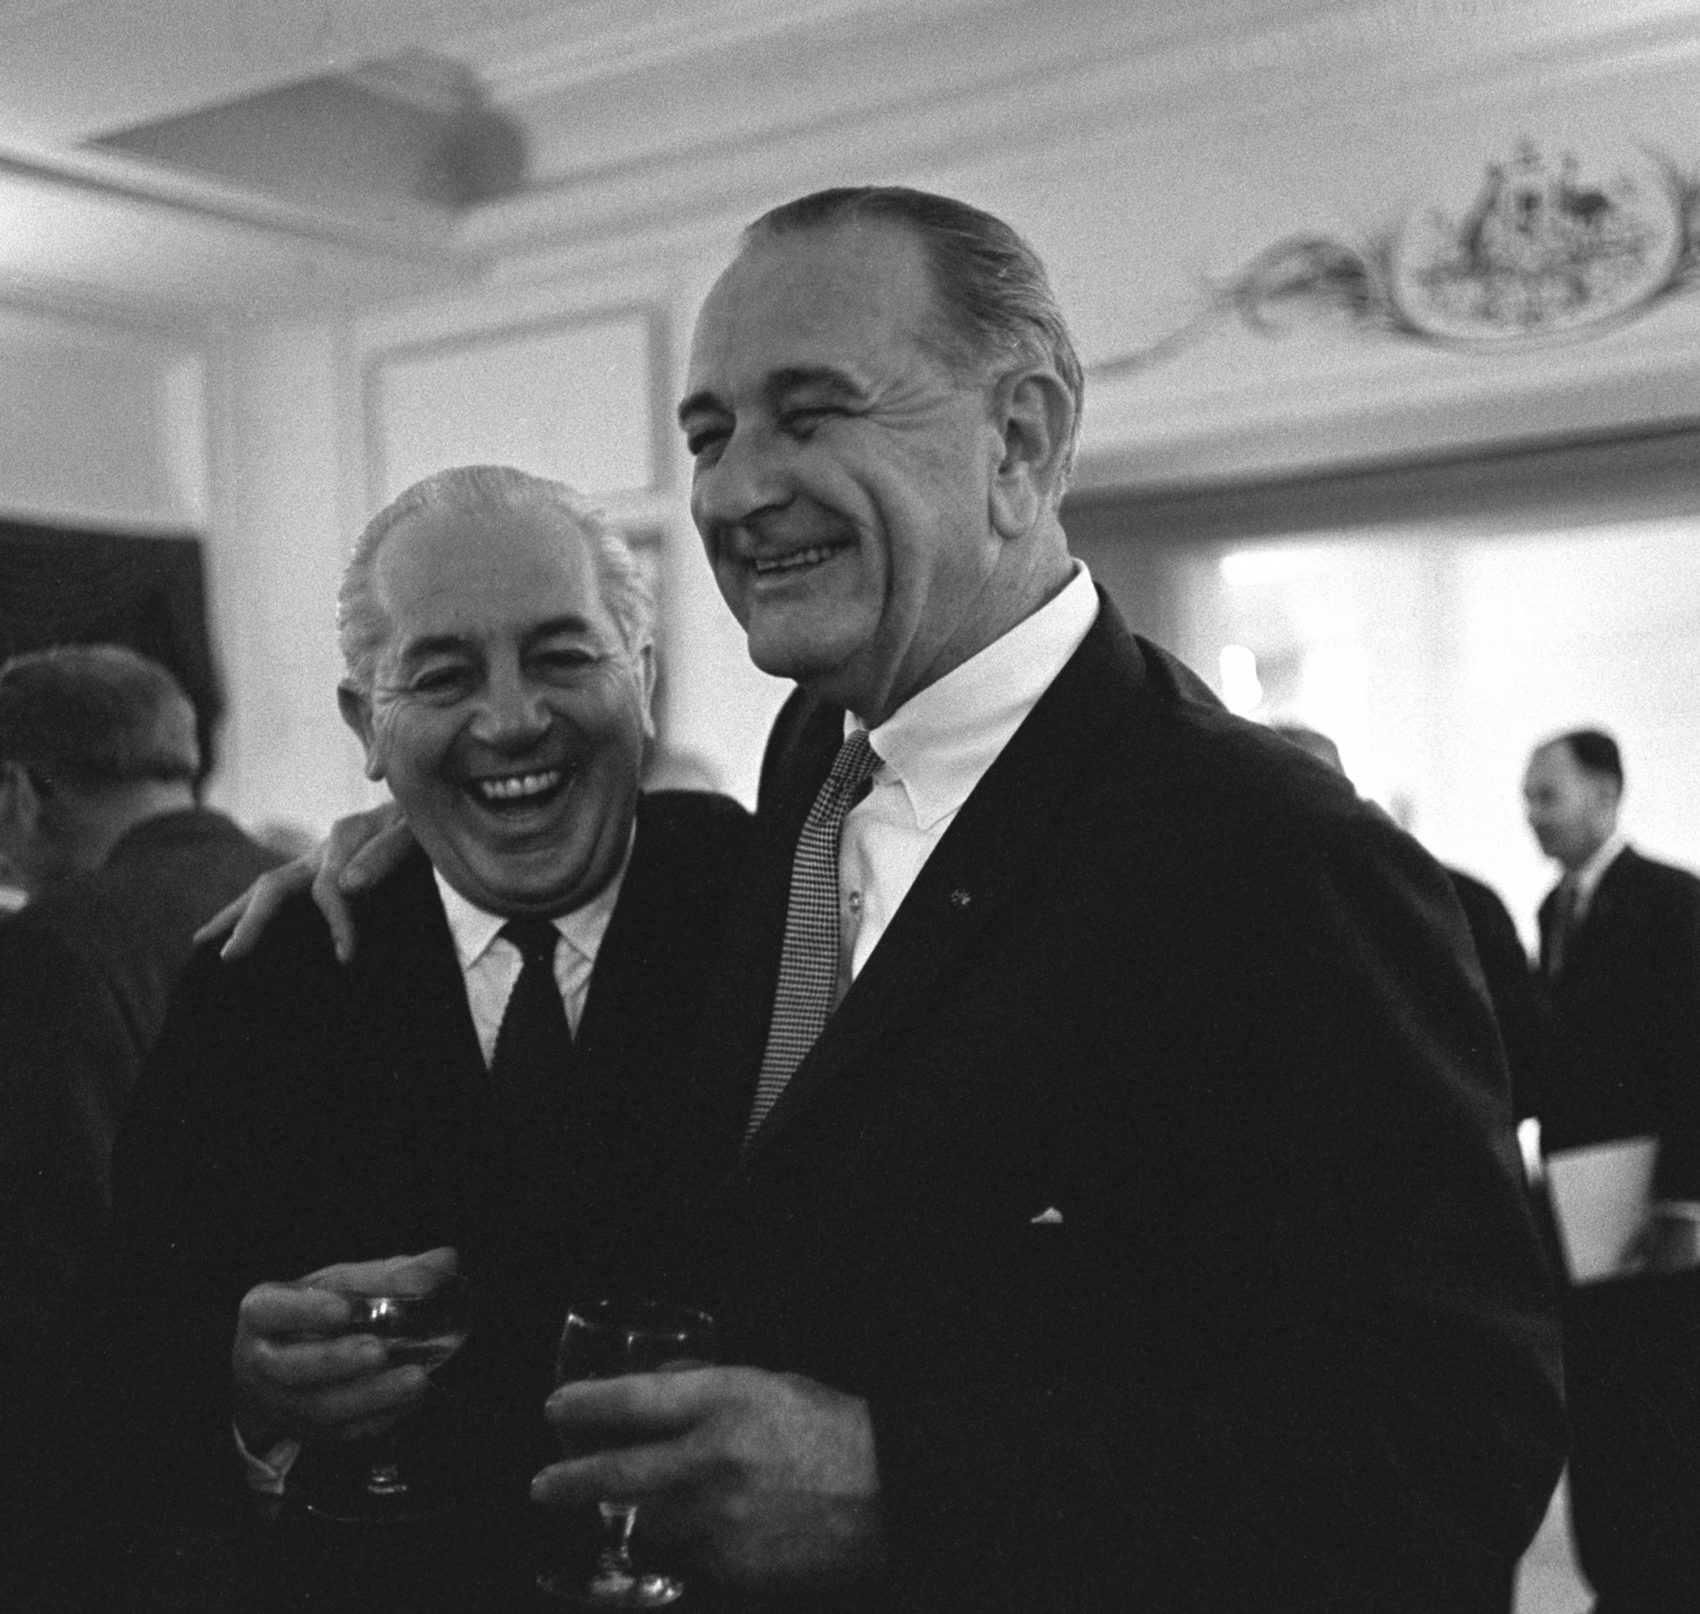 telephone call president Trump and Australia prime minister refugees bromance between LBJ Harold Holt